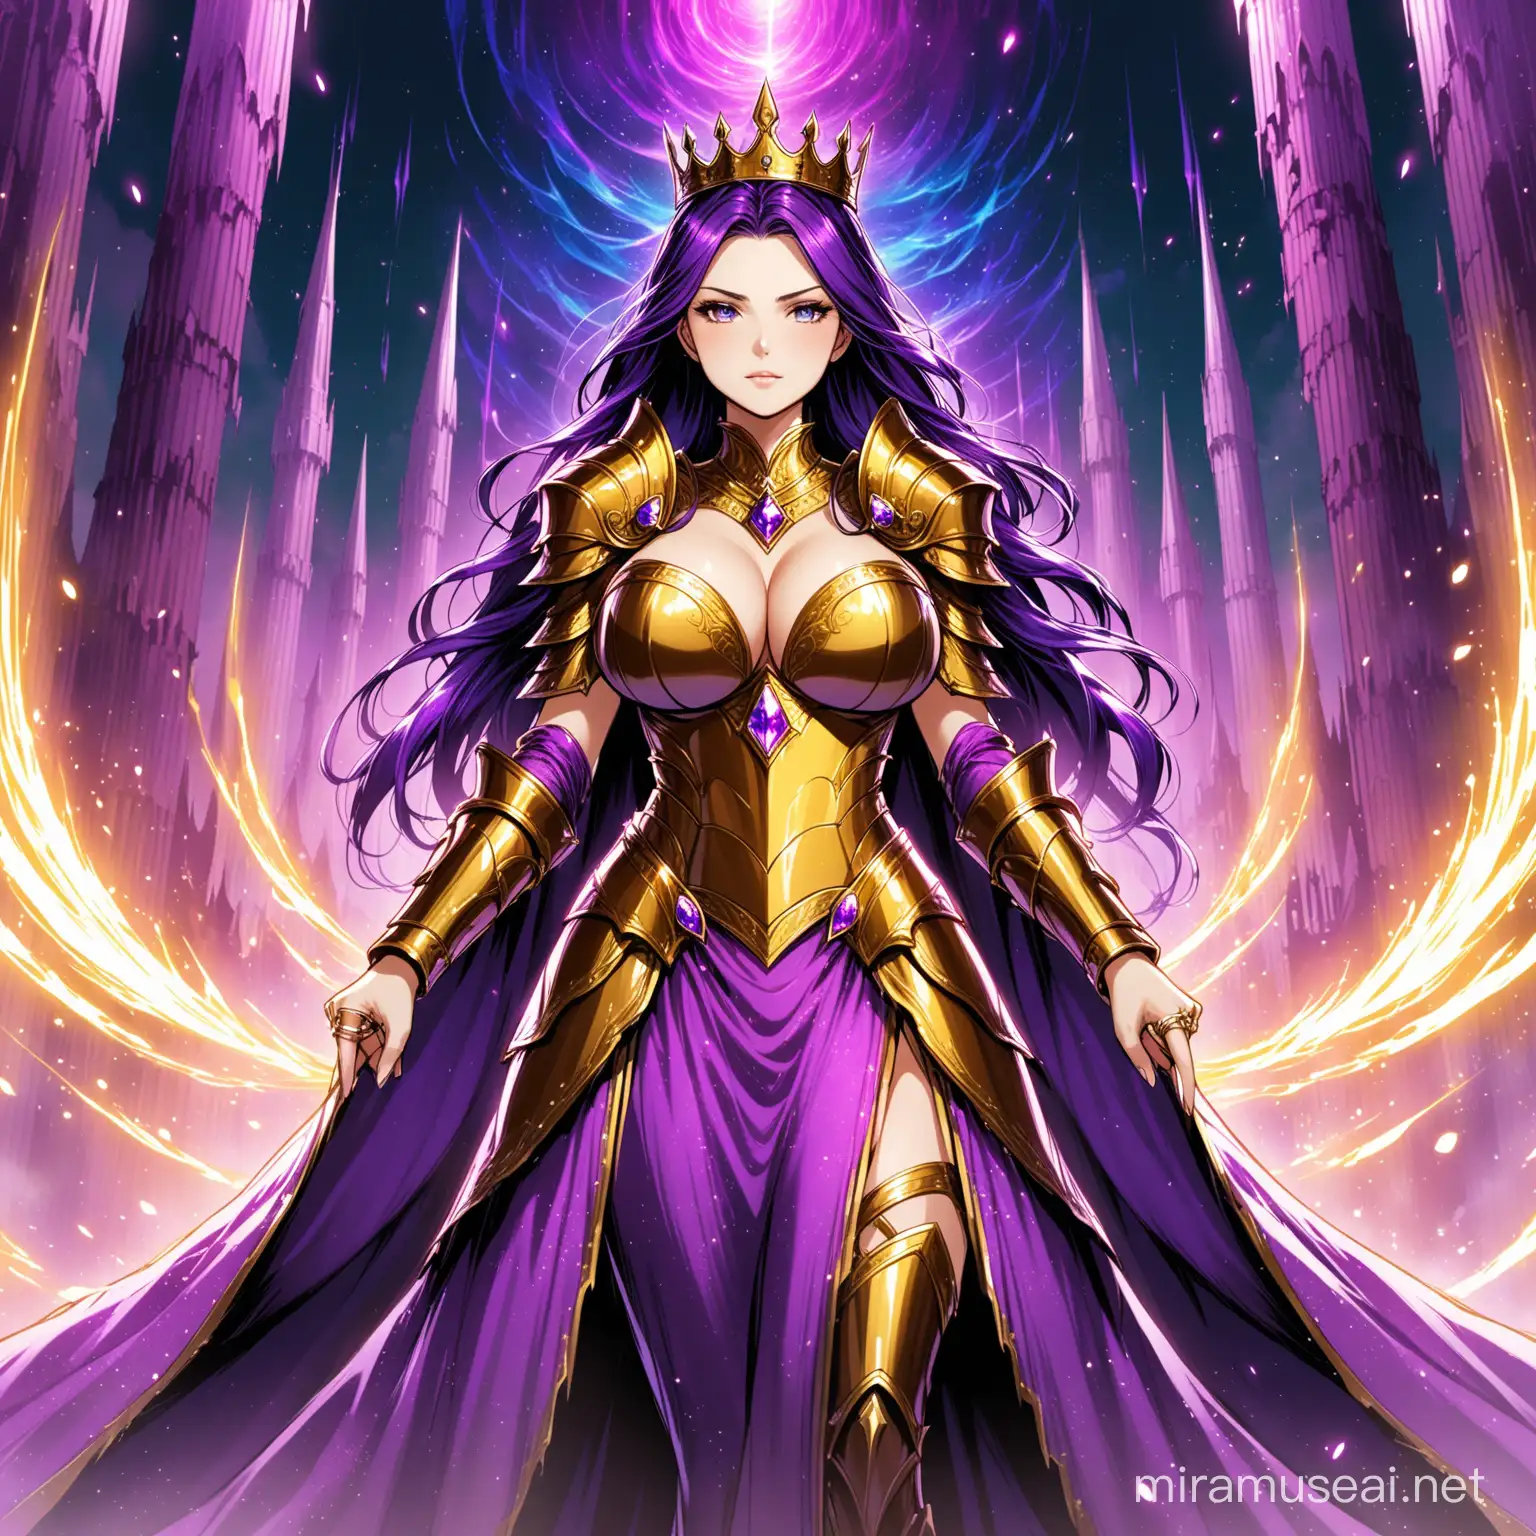 Majestic Queen Amidst Calamity Elegantly Determined Woman in Royal Purple Dress